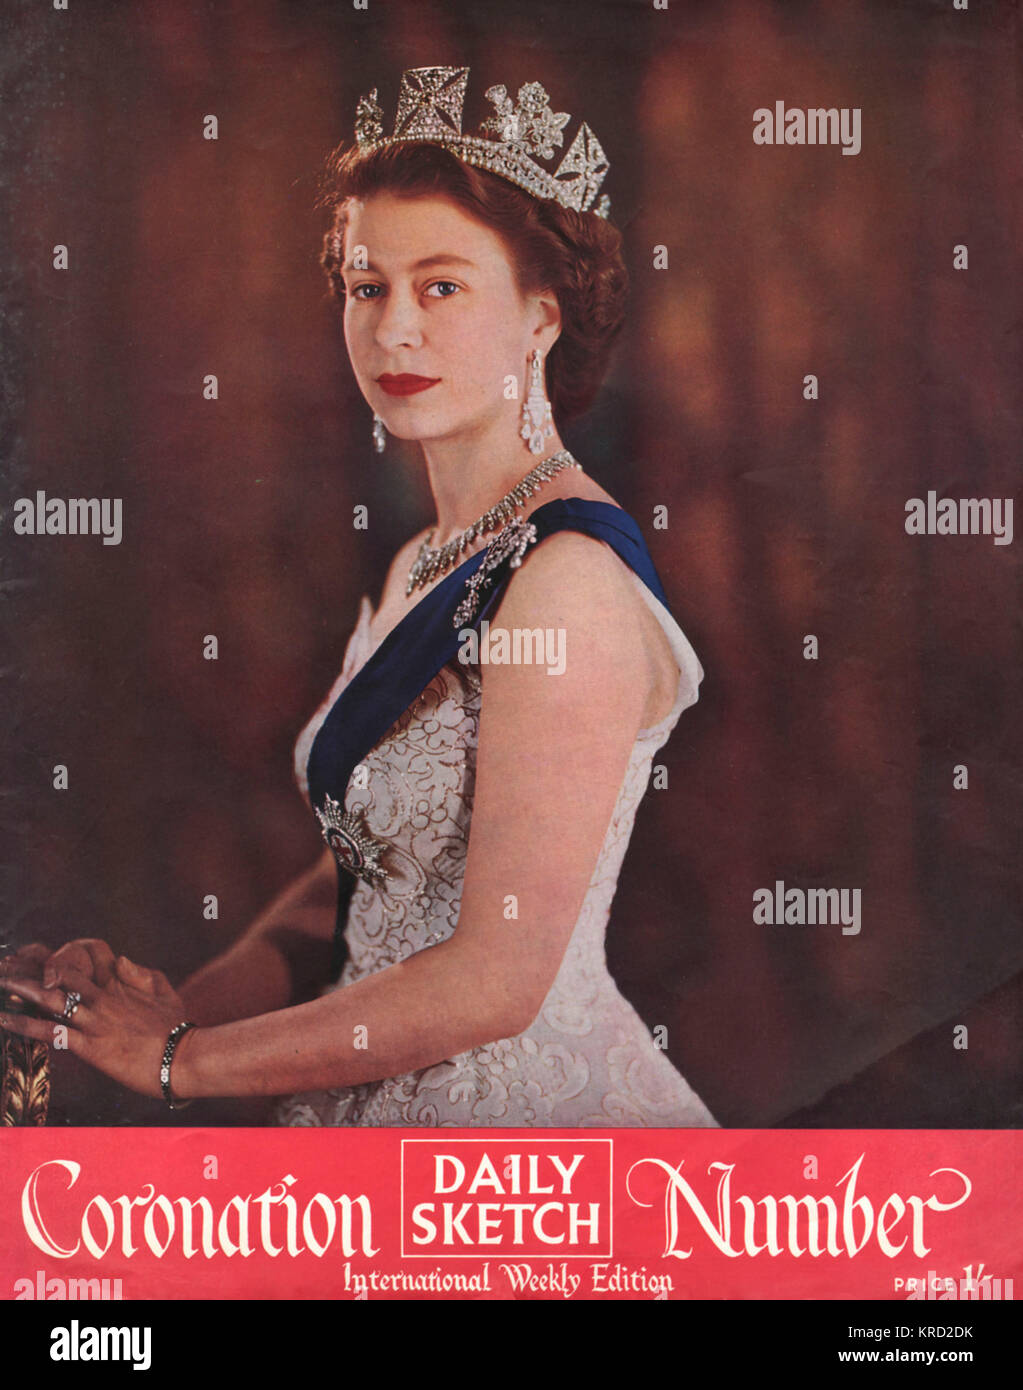 Front cover of The Daily Sketch Coronation Number featuring a portrait of the new monarch, Queen Elizabeth II.     Date: 1953 Stock Photo